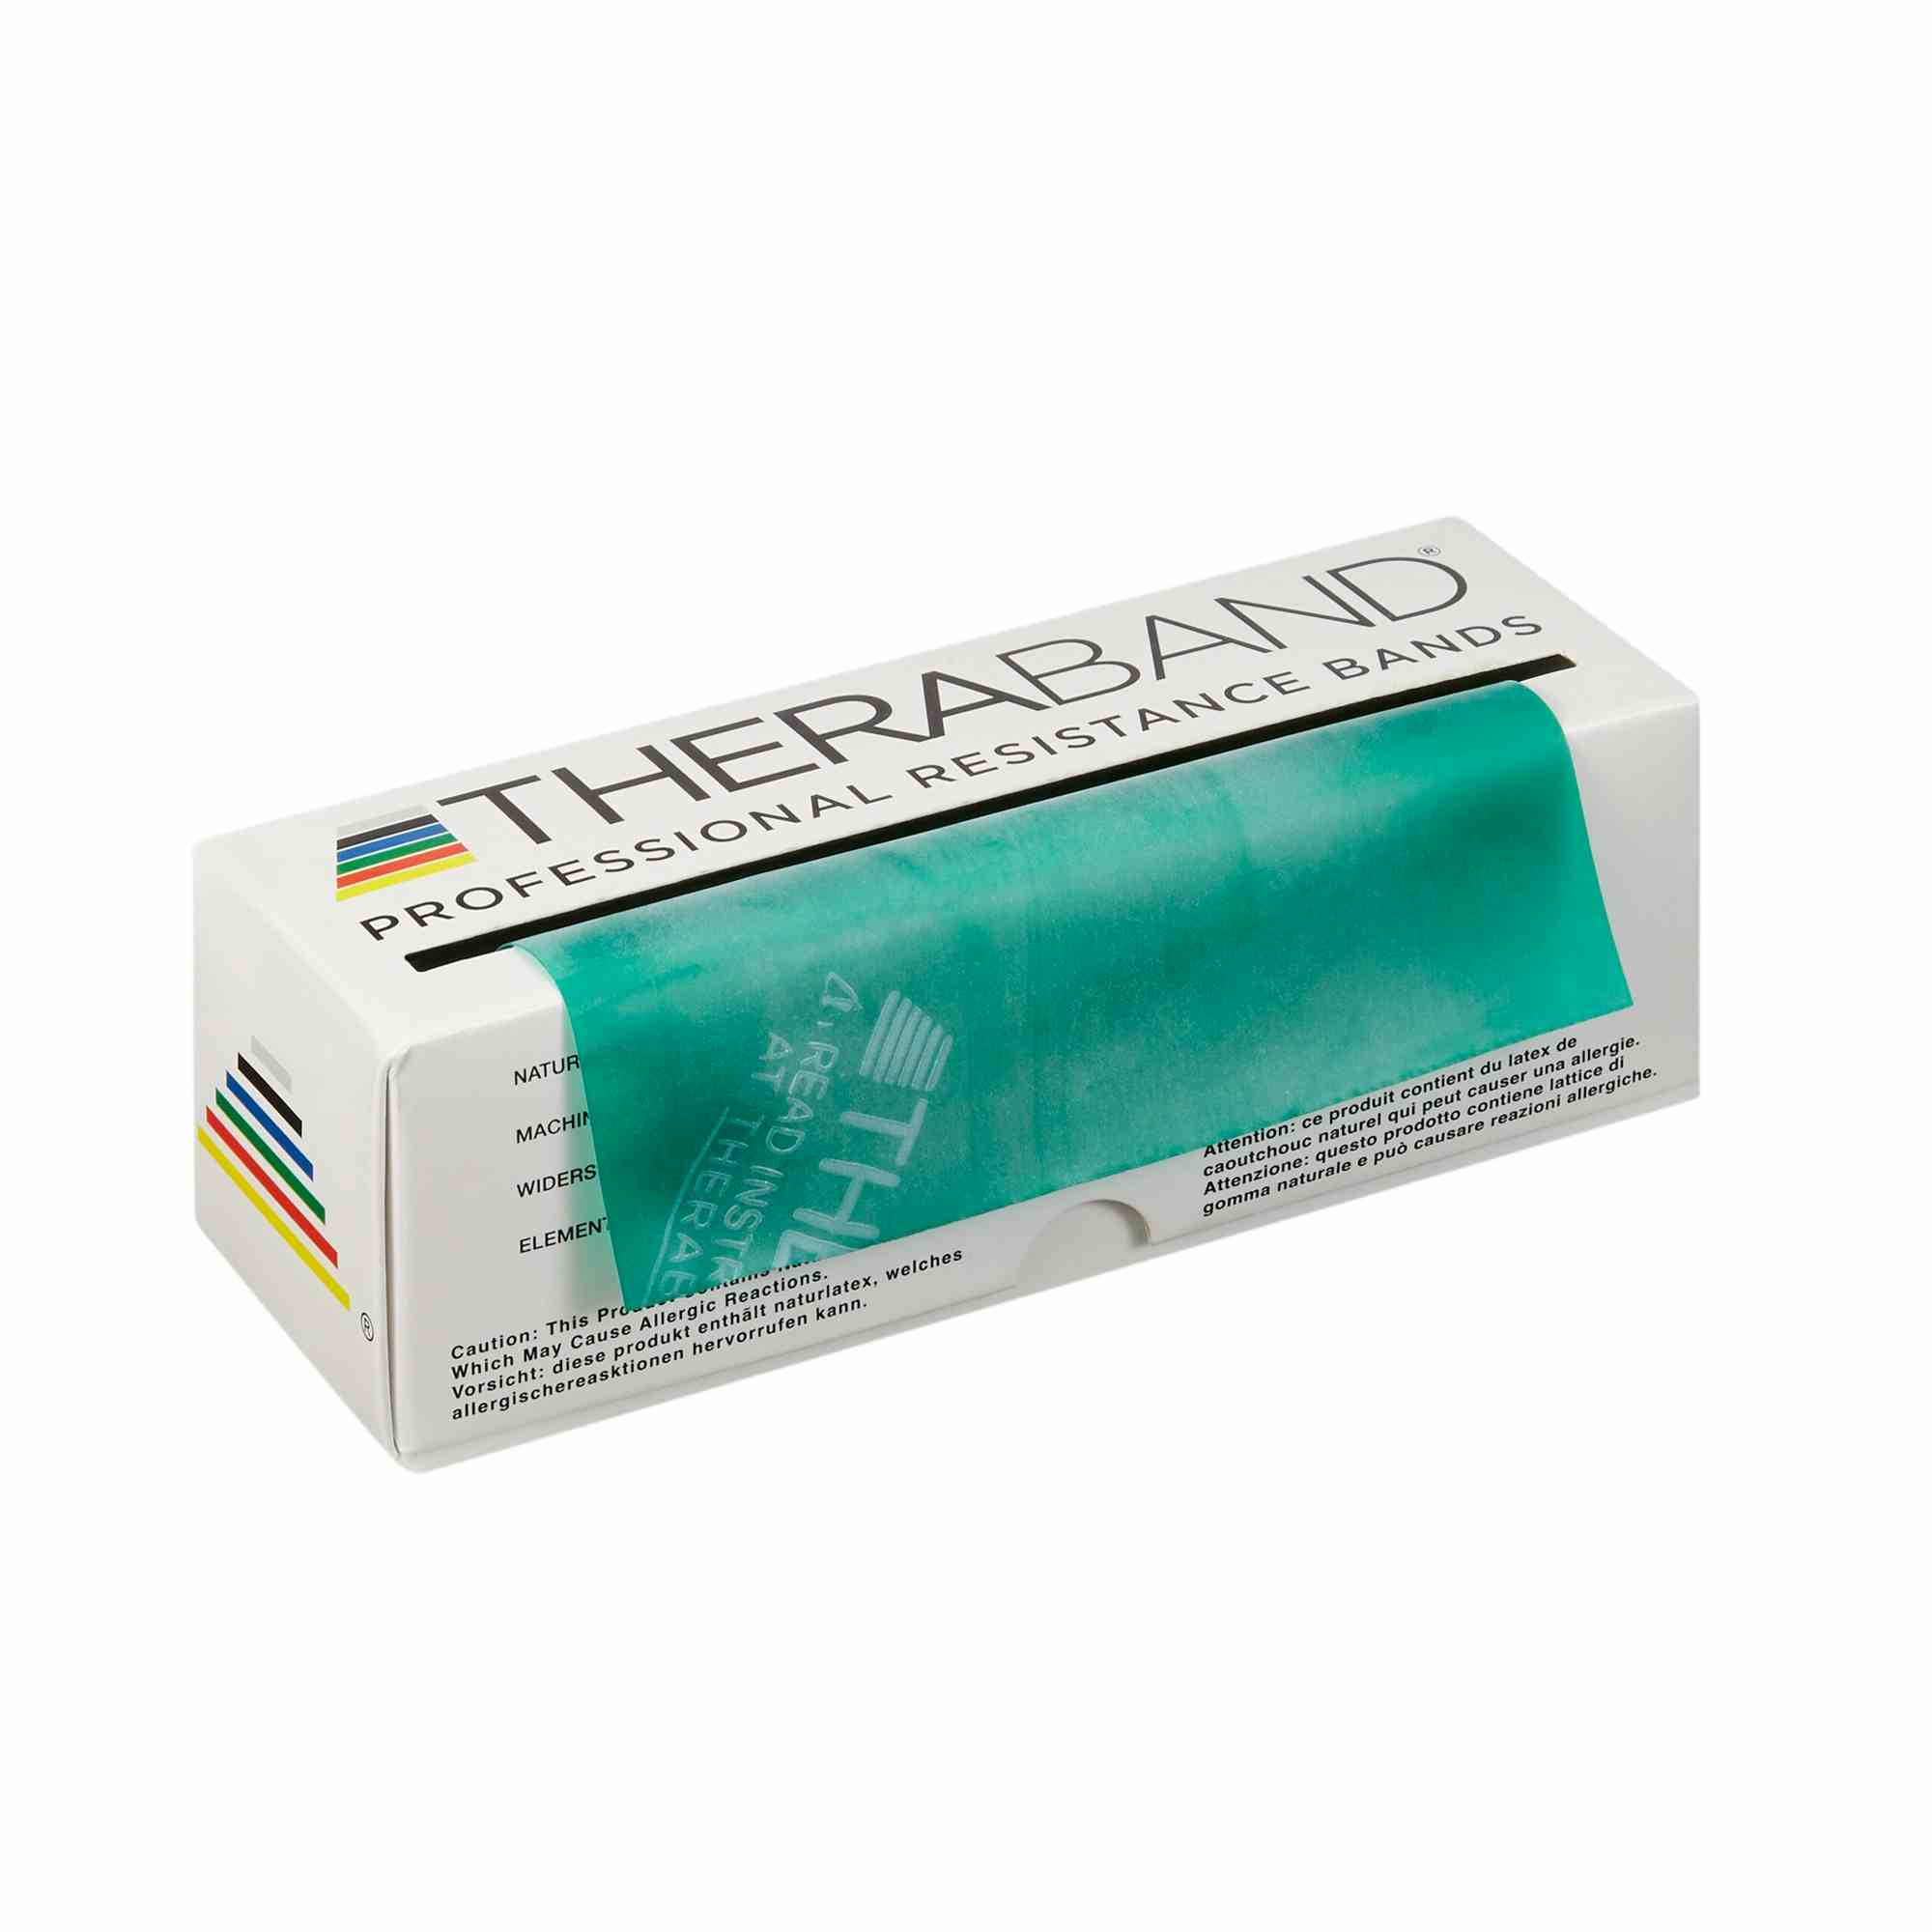 Thera-Band Physical Therapy Resistance Band, 10-1002-EA1, 1 Resistance Band